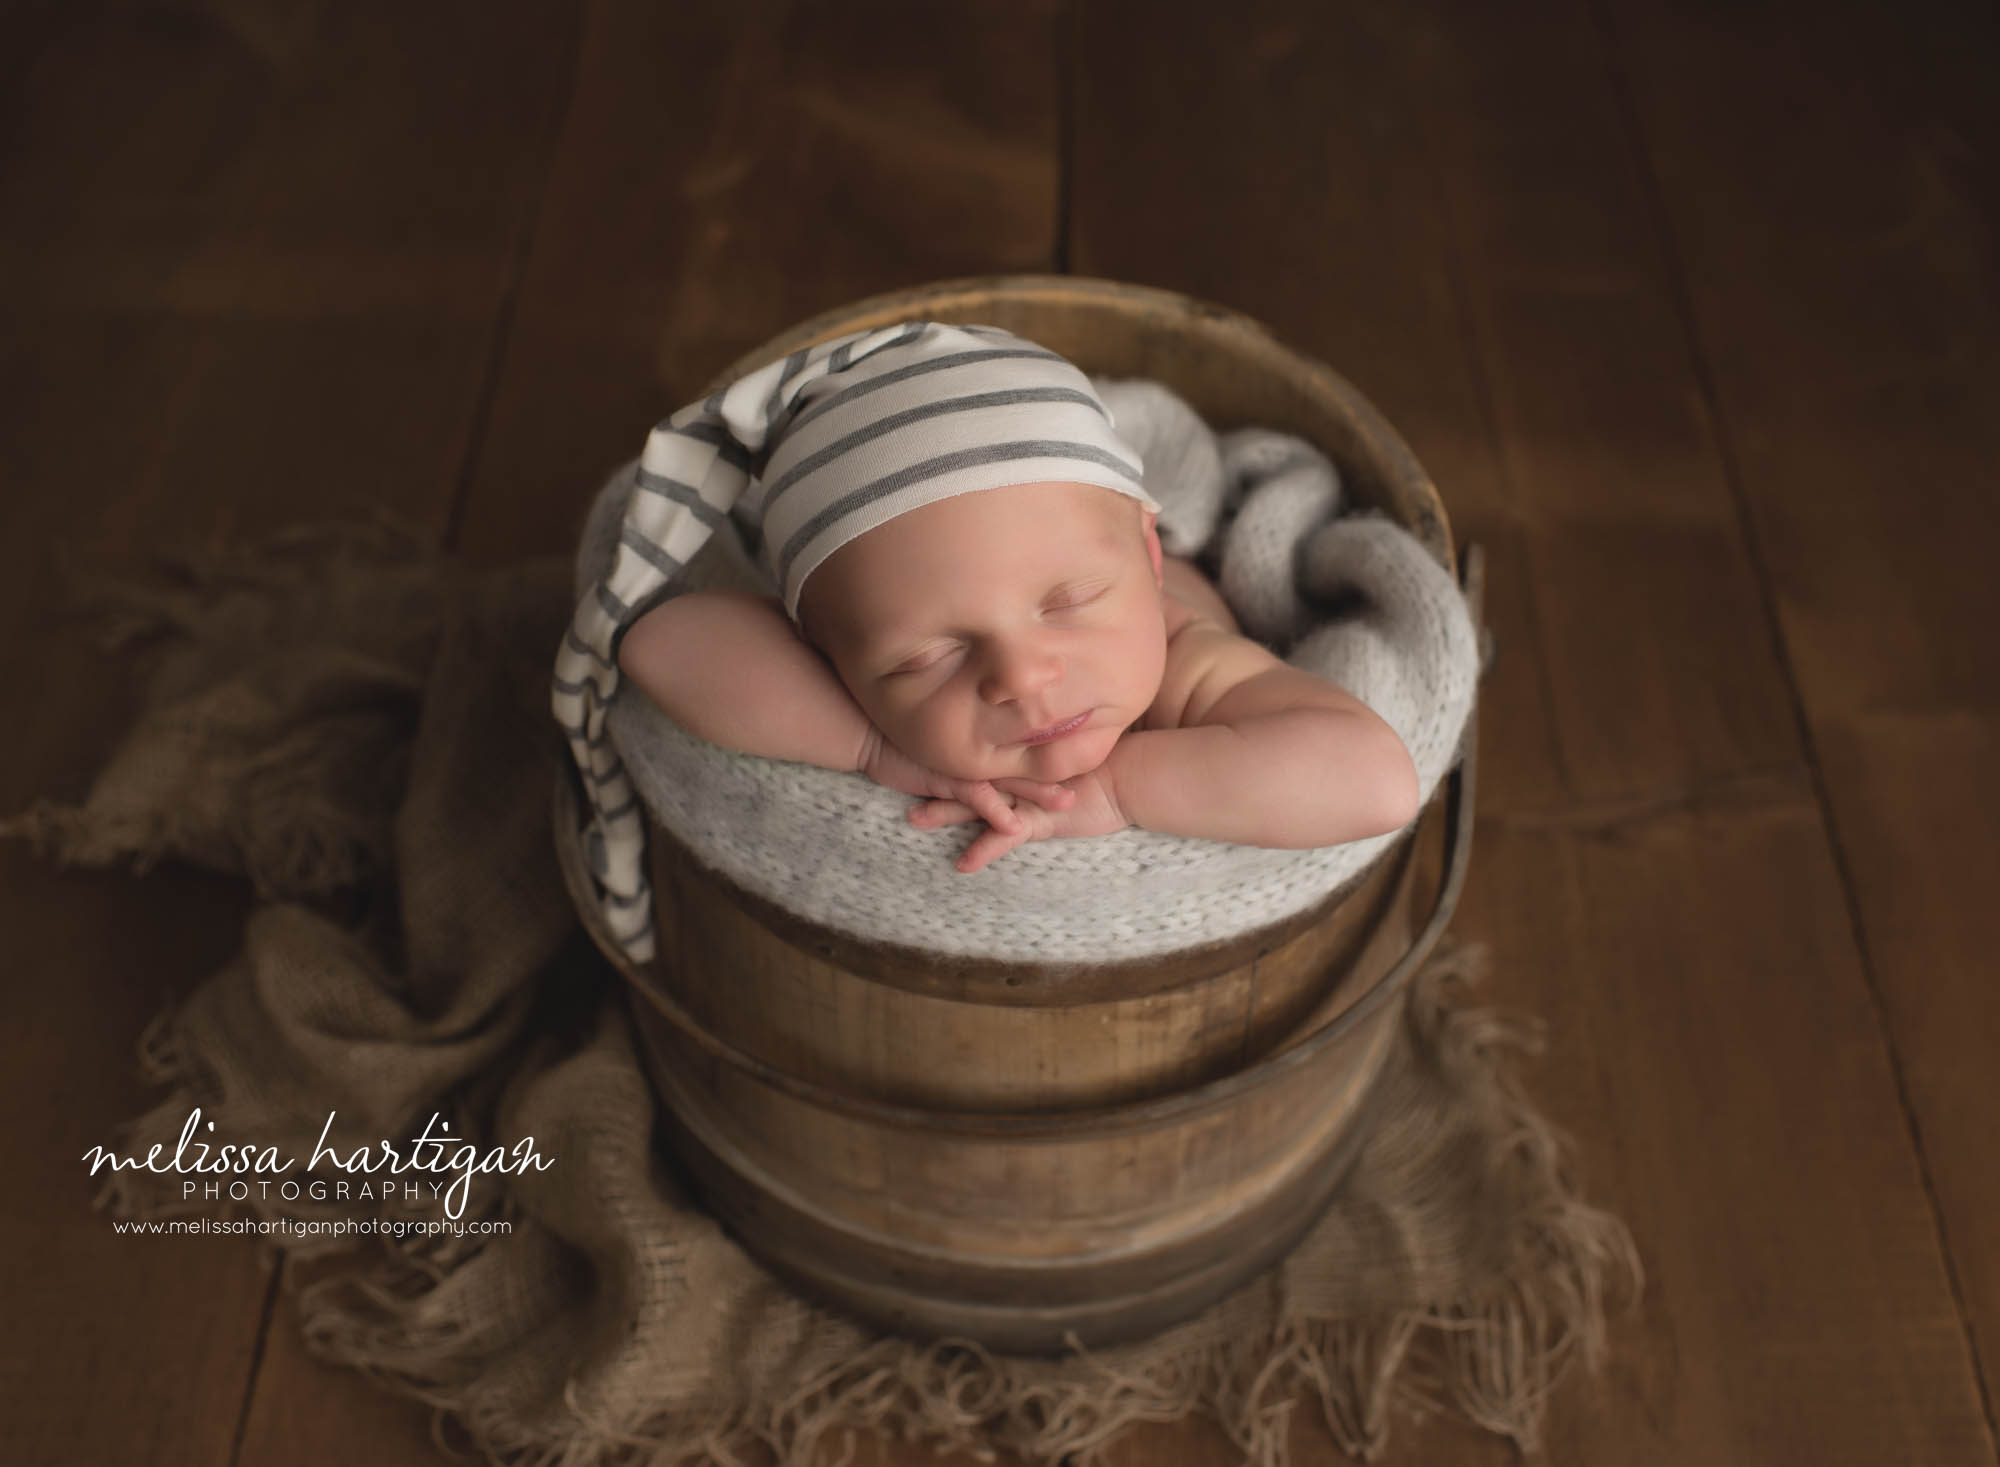 Sleeping baby boy posed in wooden barrel with white and gray stripped sleepy cap